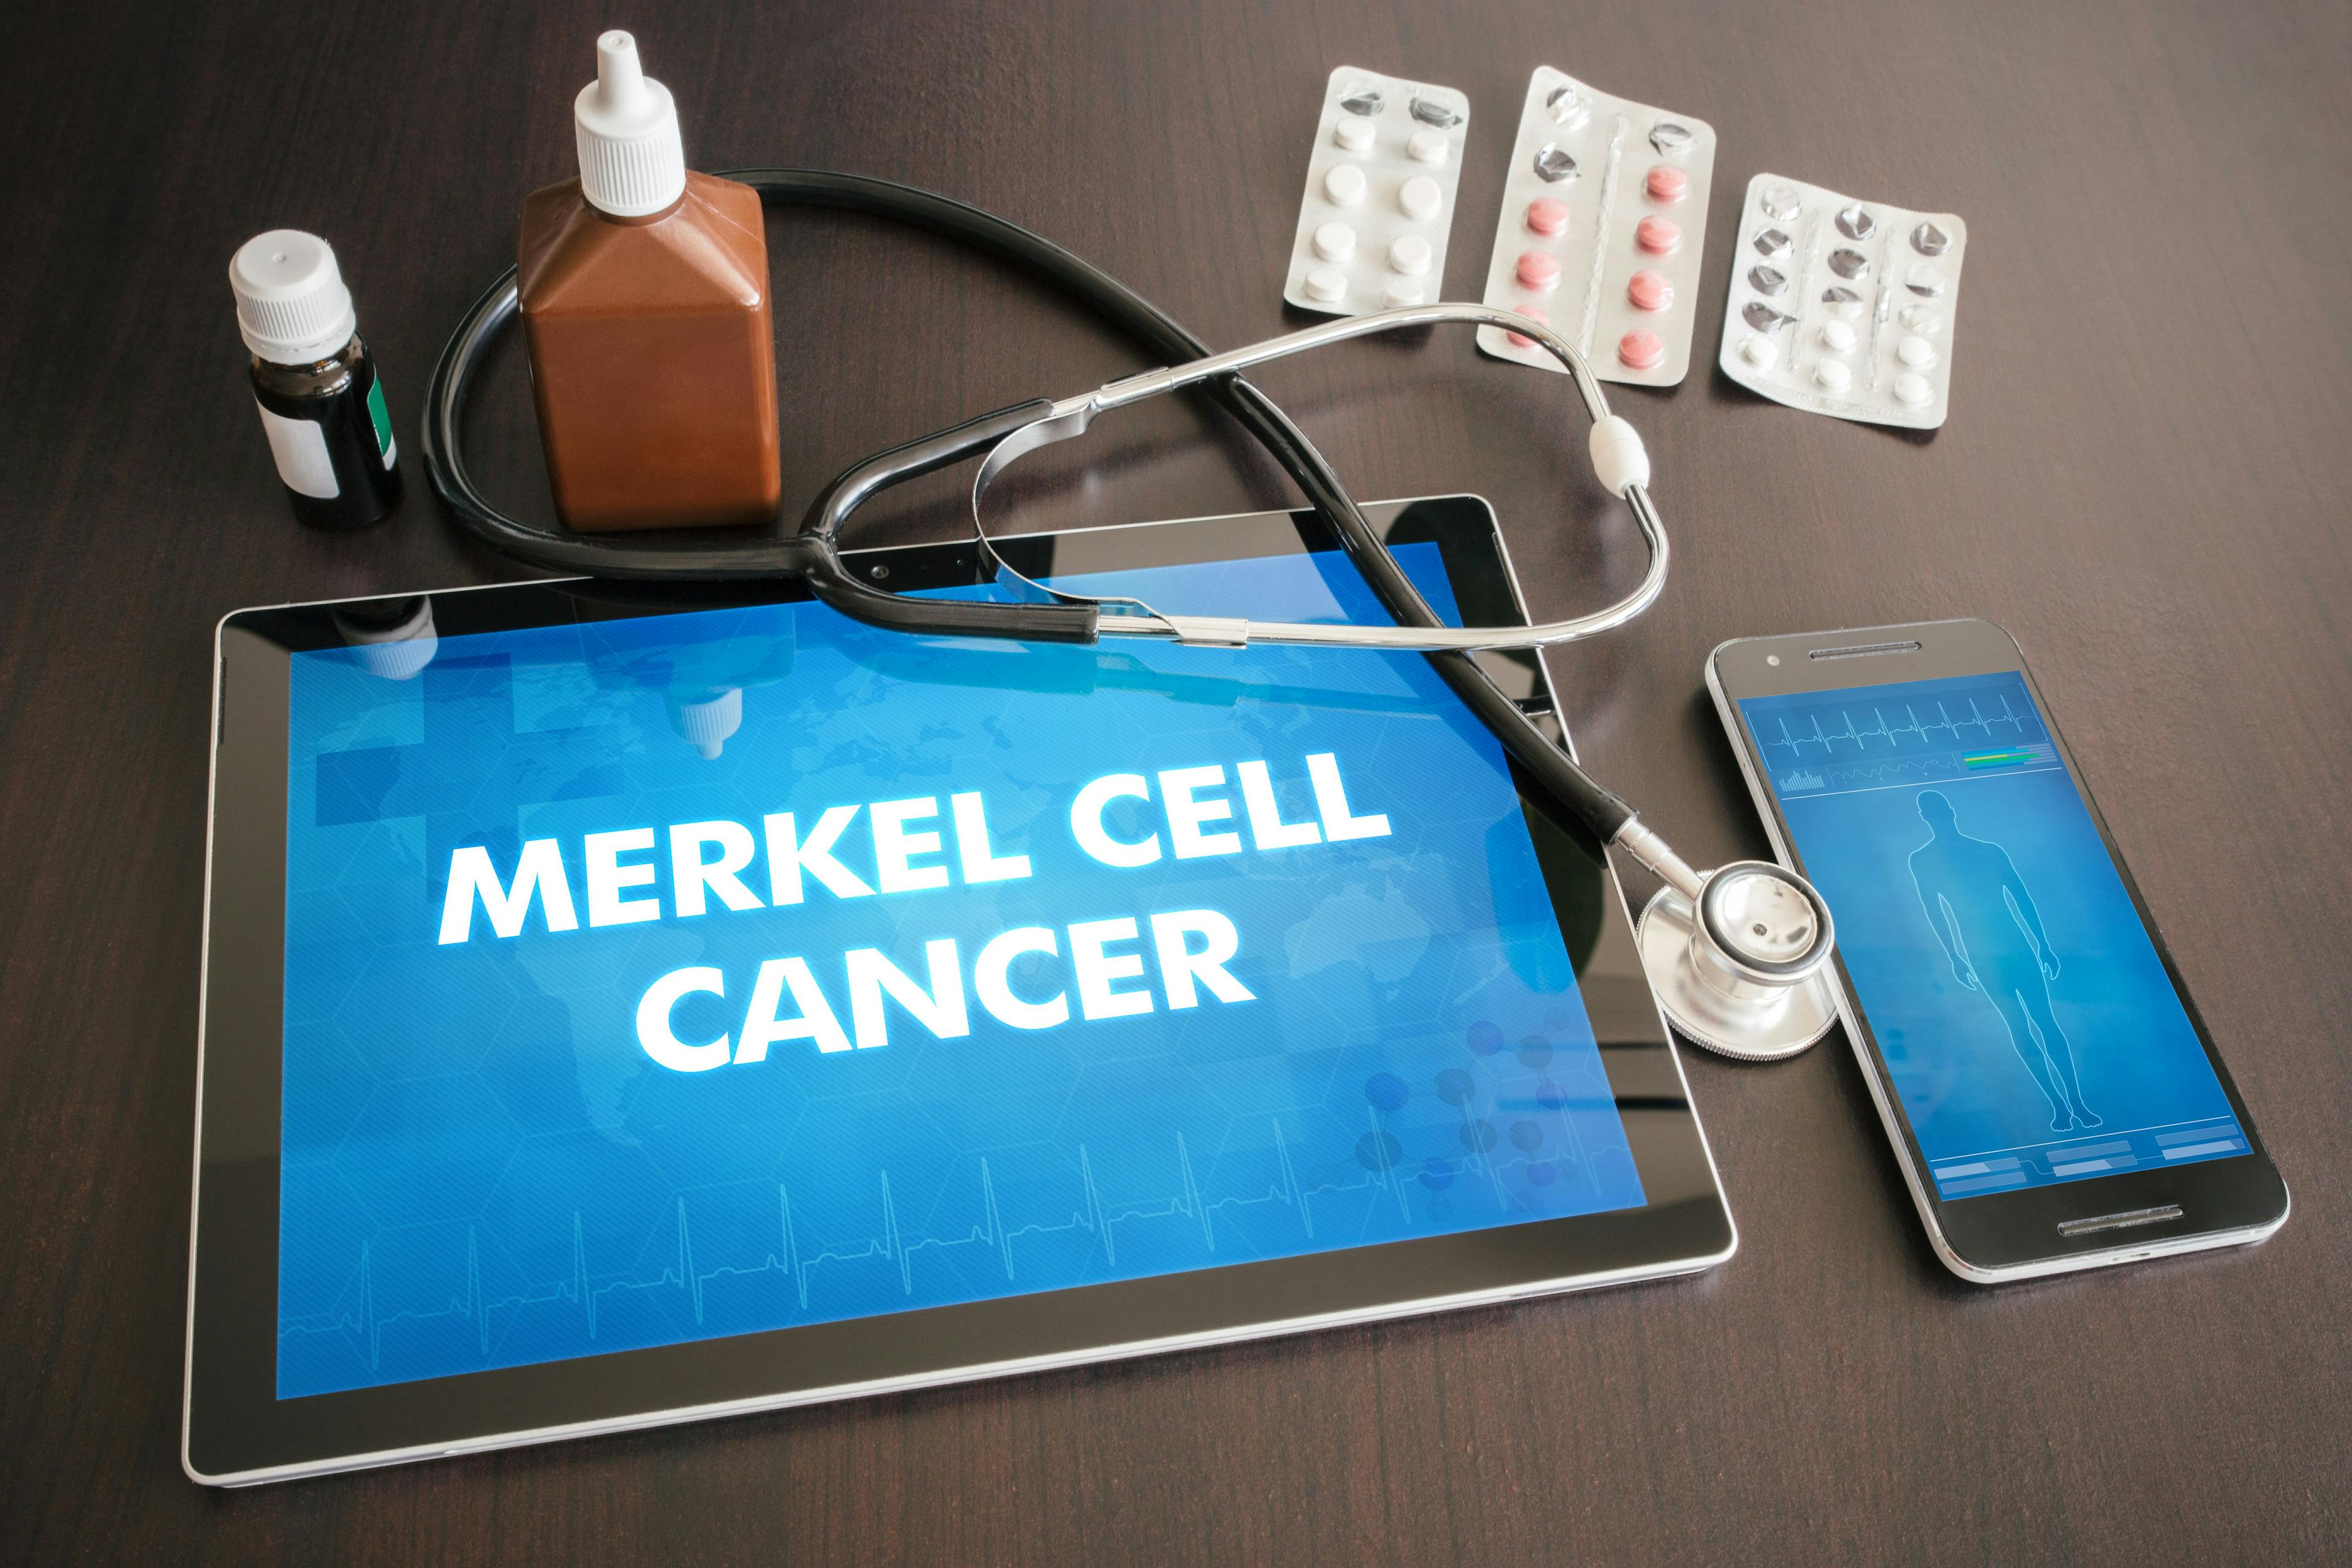 Merkel cell cancer (cancer type) diagnosis medical concept on tablet screen with stethoscope | Image credit: © ibreakstock - © stock.adobe.com